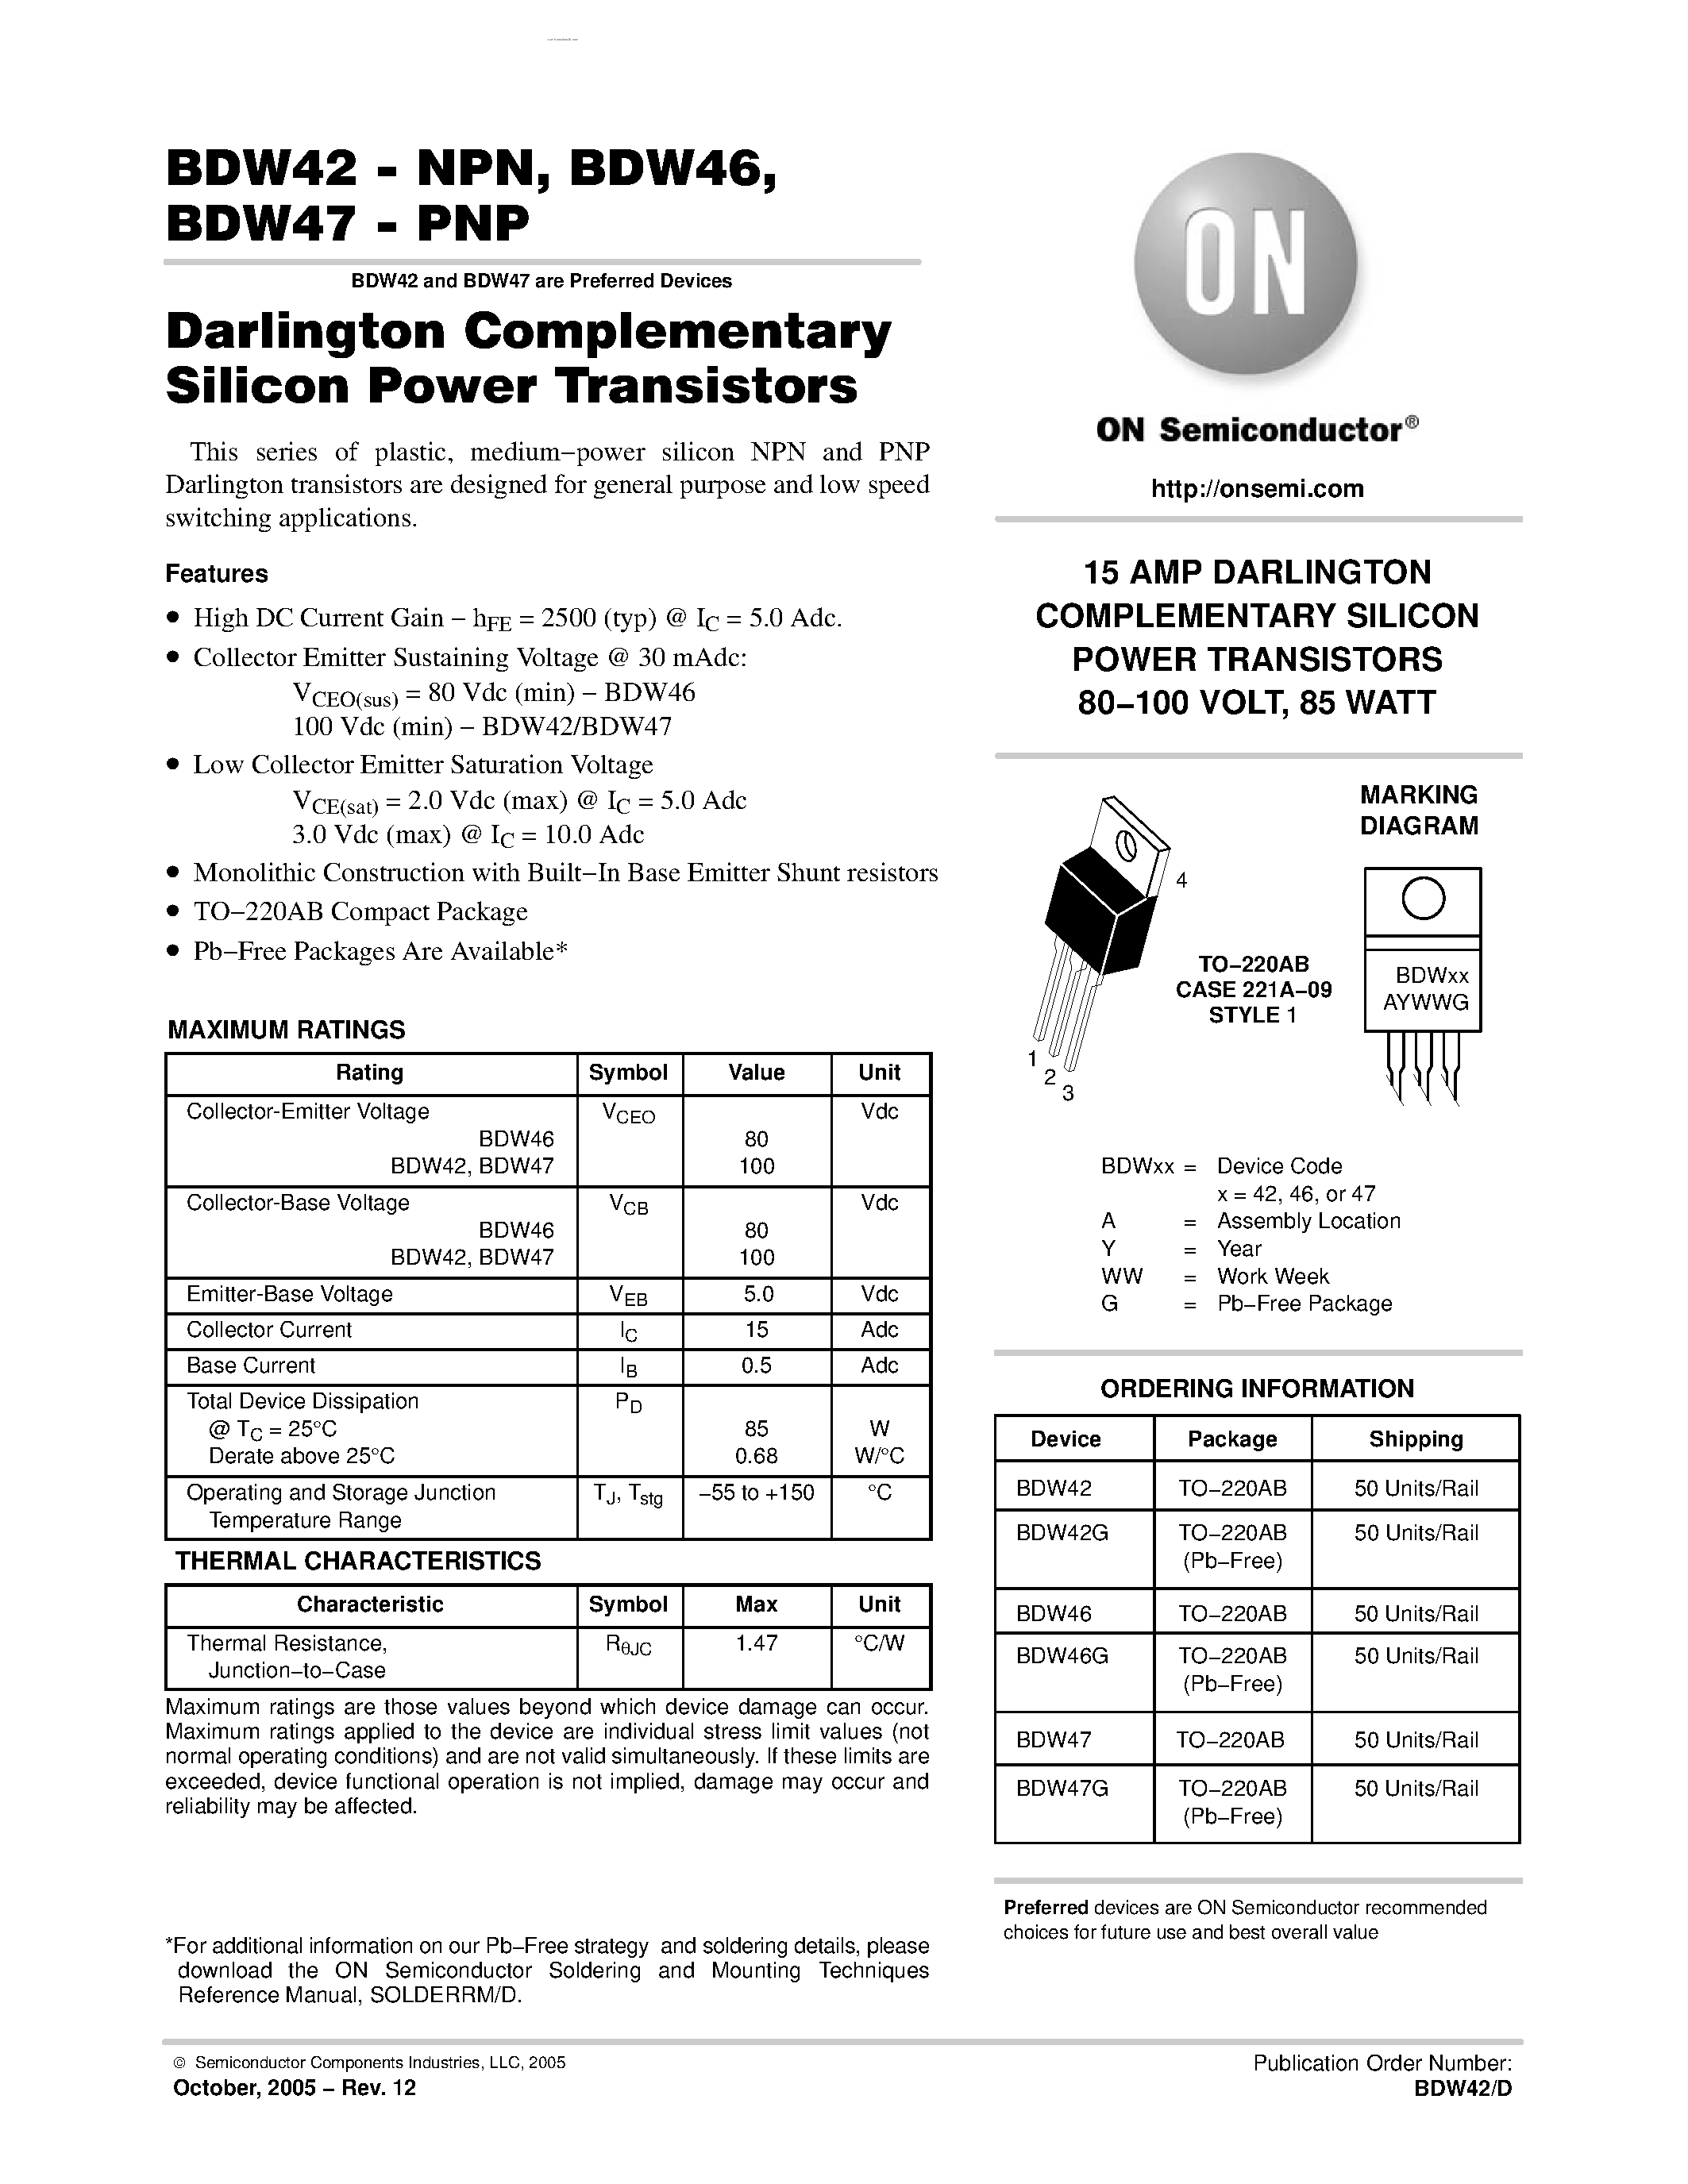 Datasheet BDW42 - DARLINGTON COMPLEMENTARY SILICON POWER TRANSISTORS page 1